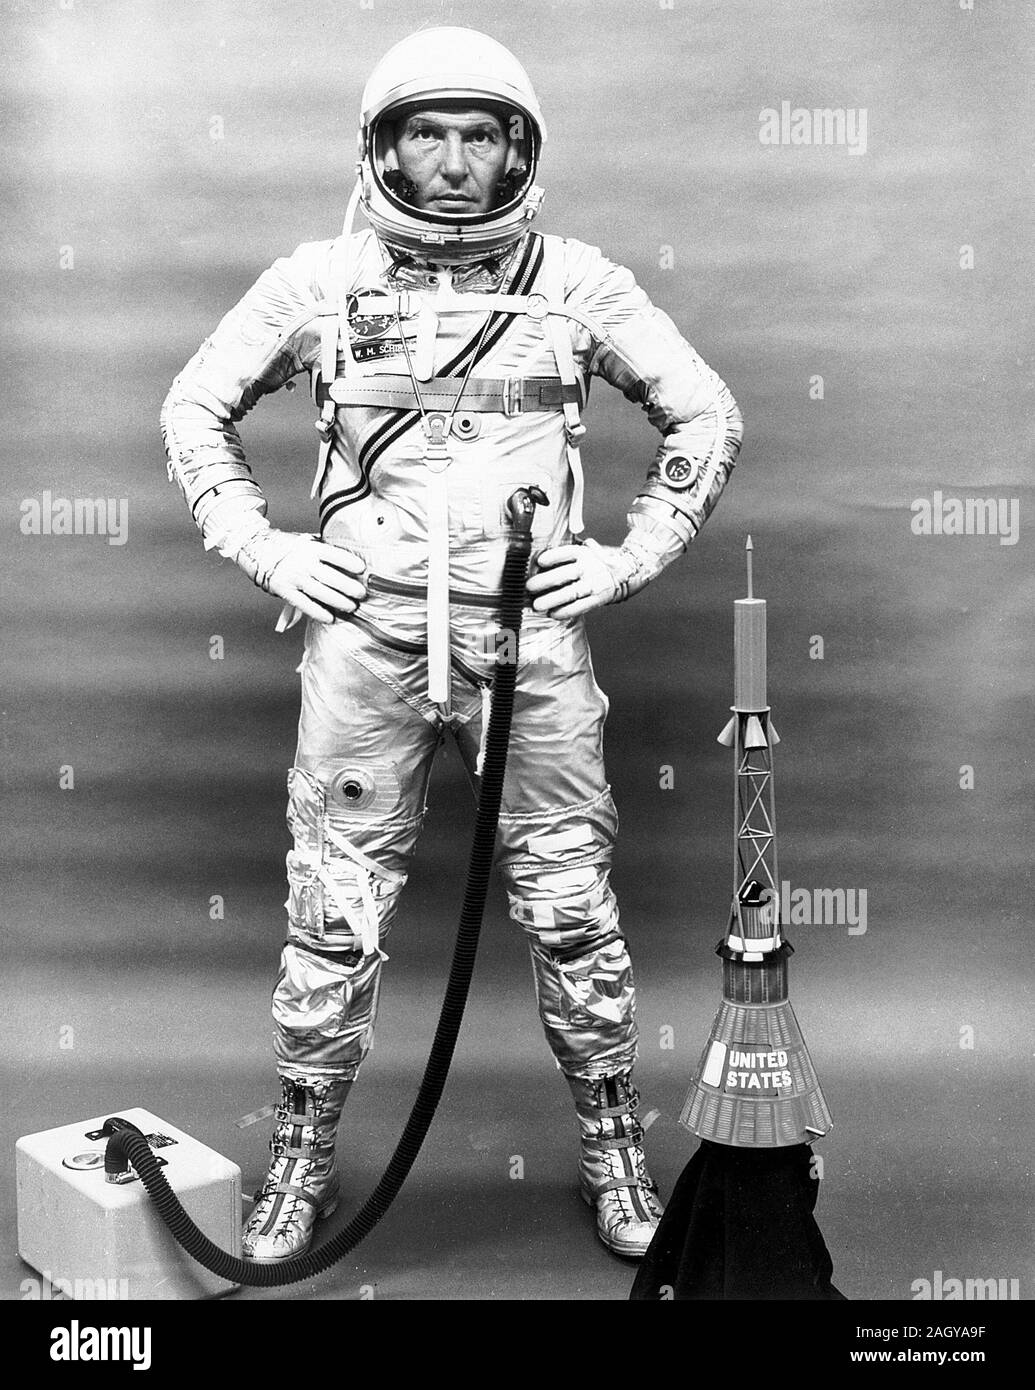 Project Mercury Astronaut Walter Schirra in full pressure suit, astronaut Walter M. Schirra, one of the original seven astronauts for Mercury Project selected by NASA on April 27, 1959 Stock Photo